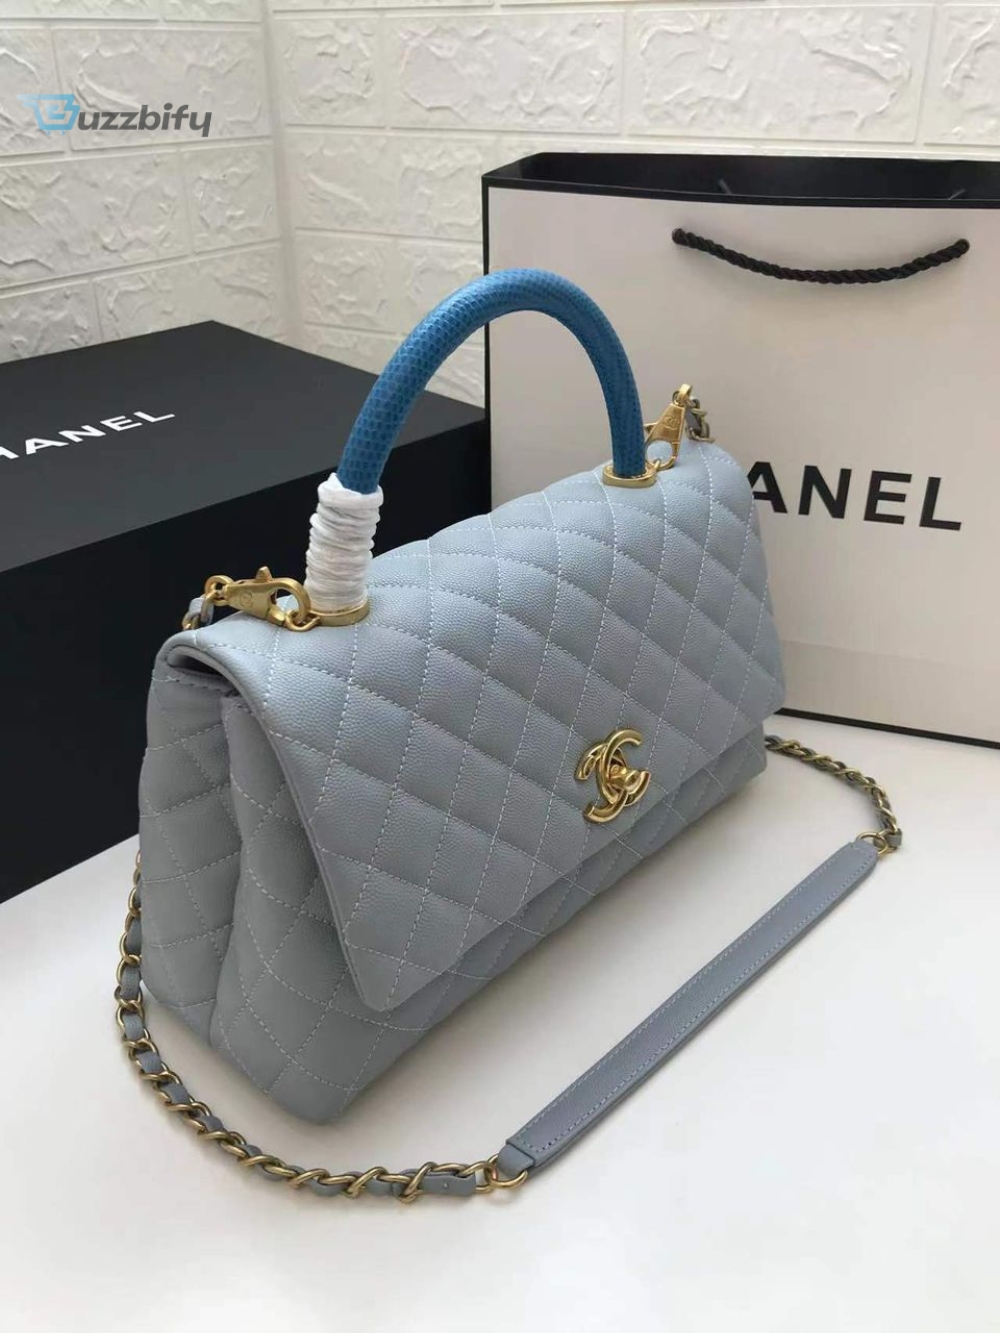 Chanel Schwarz Large Flap Bag With Top Handle Light Grey For Women, Women’s Handbags, Shoulder And Crossbody Bags 11in/28cm A92991